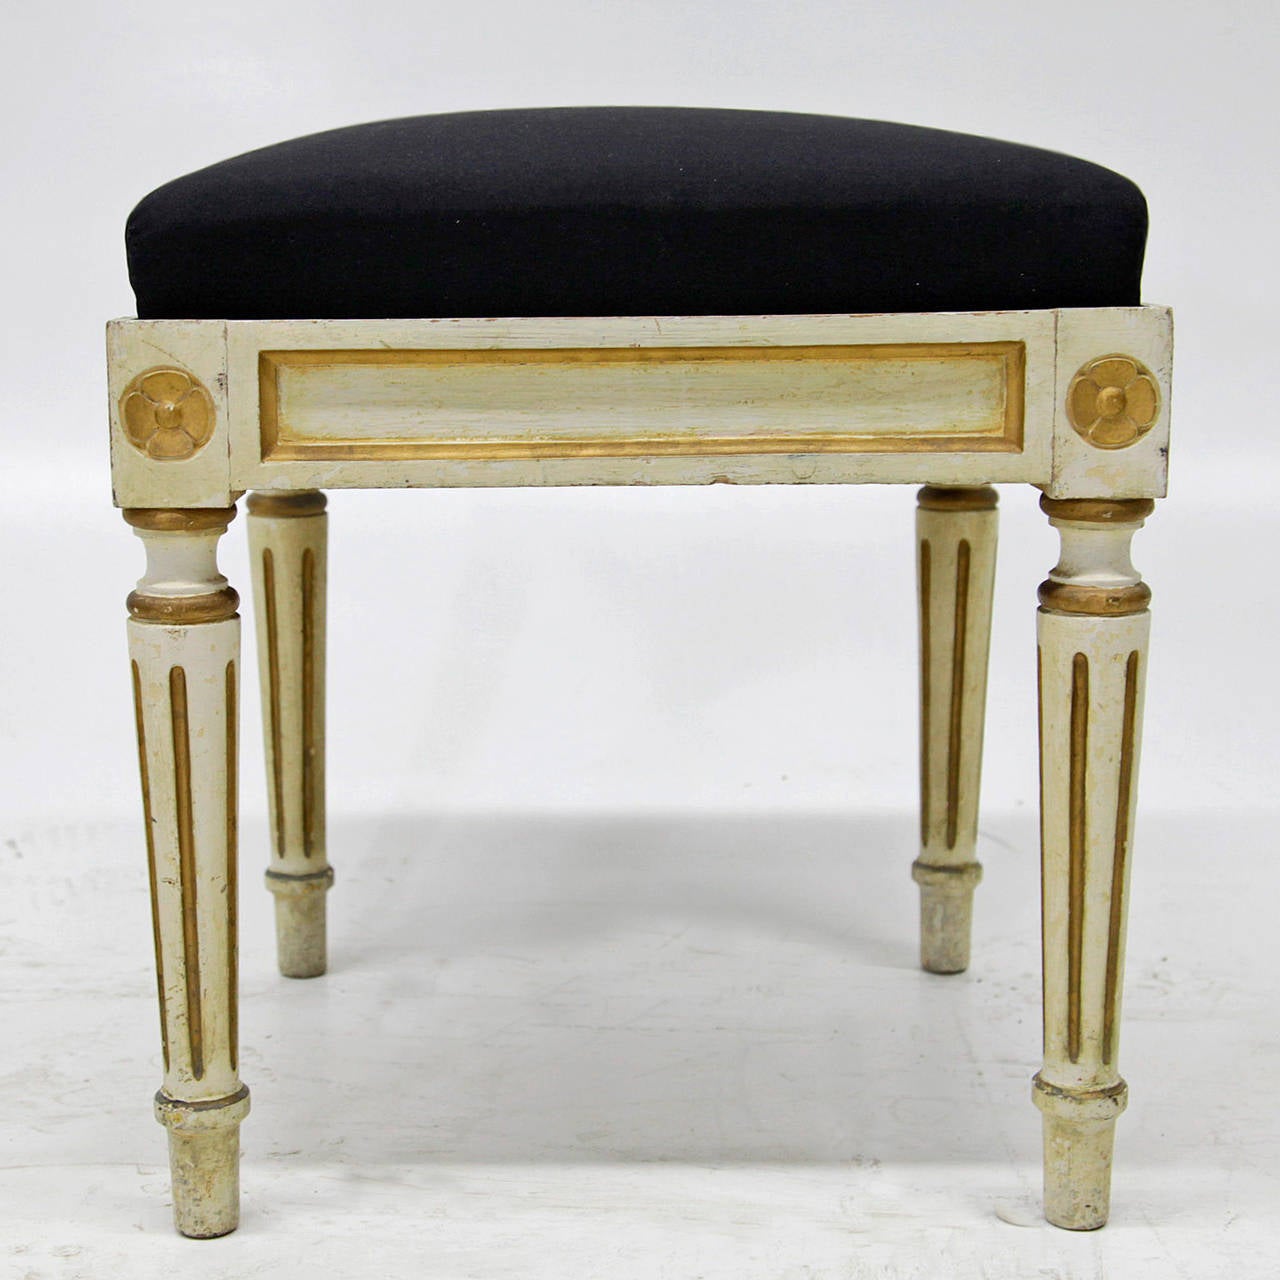 Wonderful Pair of French Stools and Bench In Louis-Seize Style 1